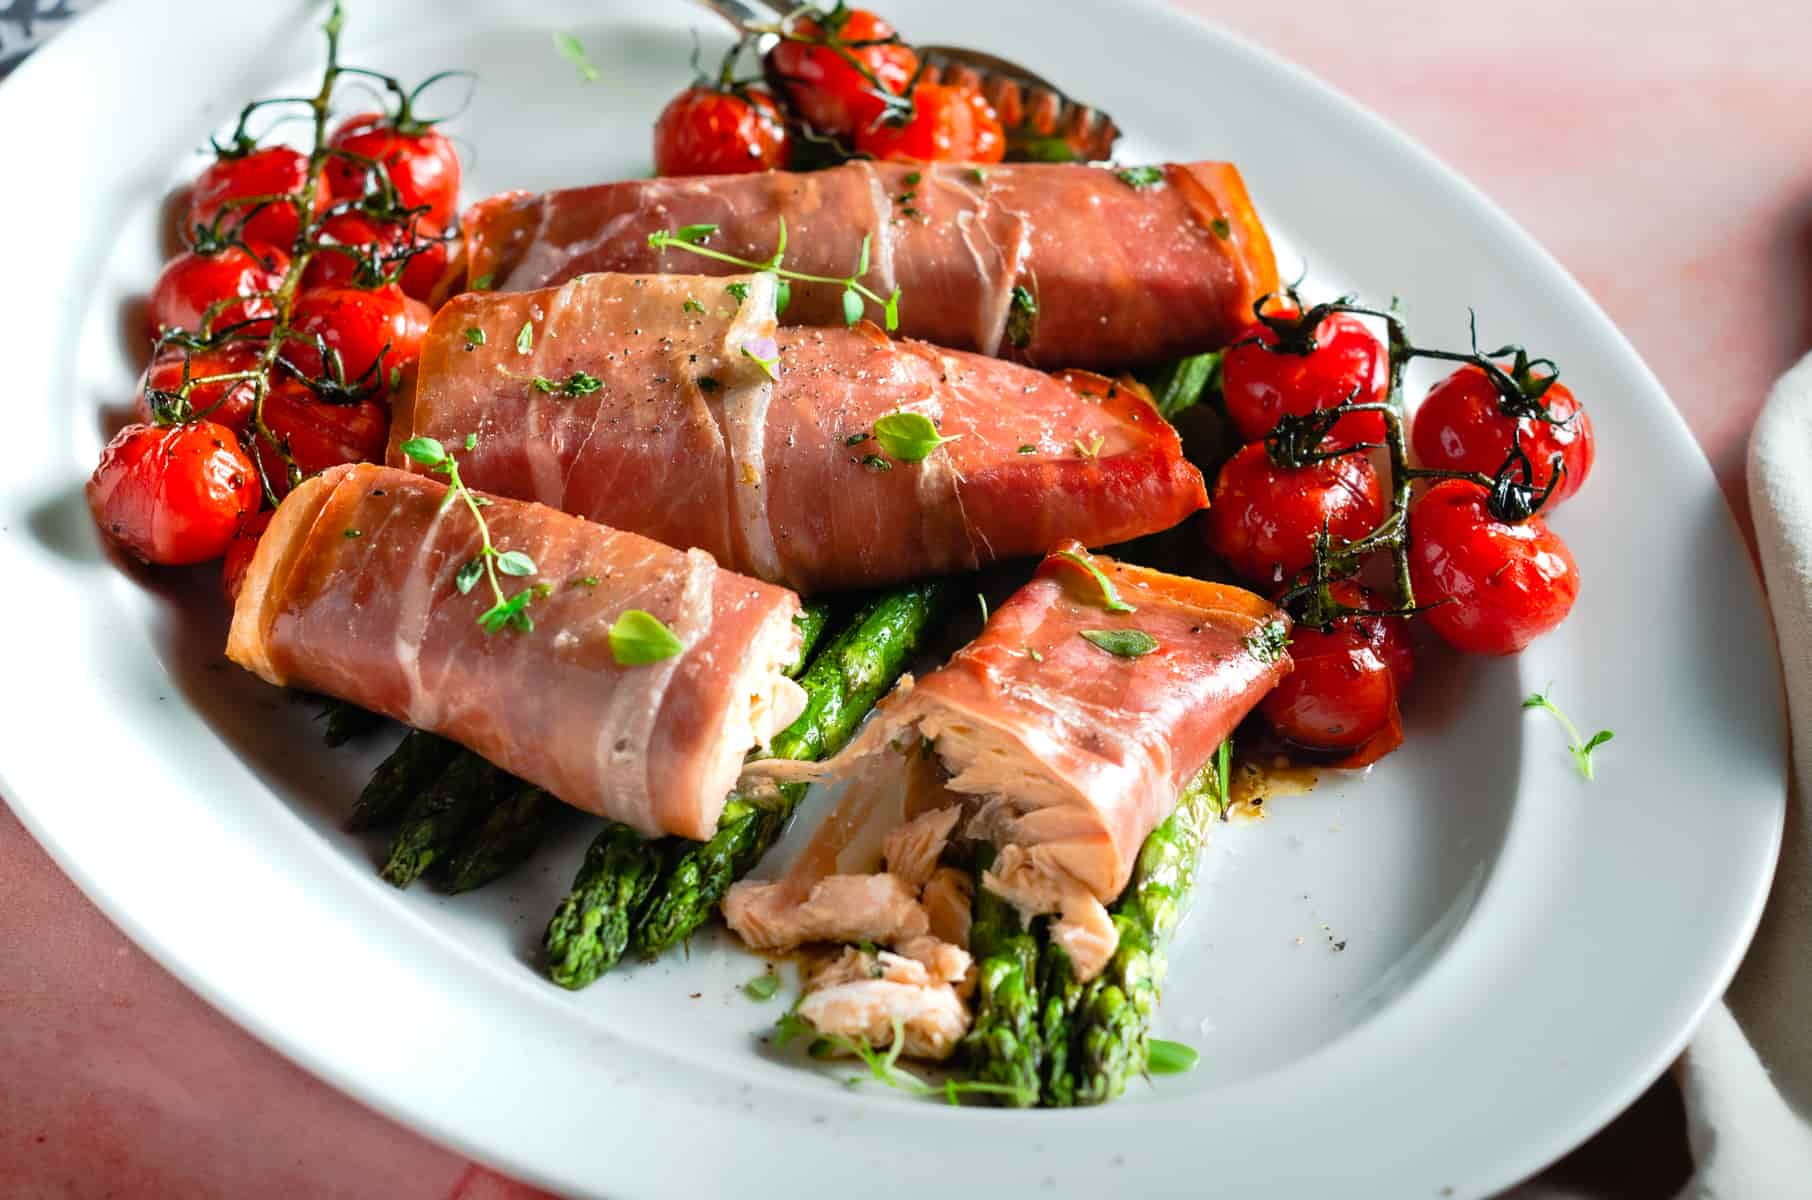 A mixed platter of salmon baked in parma ham served with asparagus and oven tomatoes.